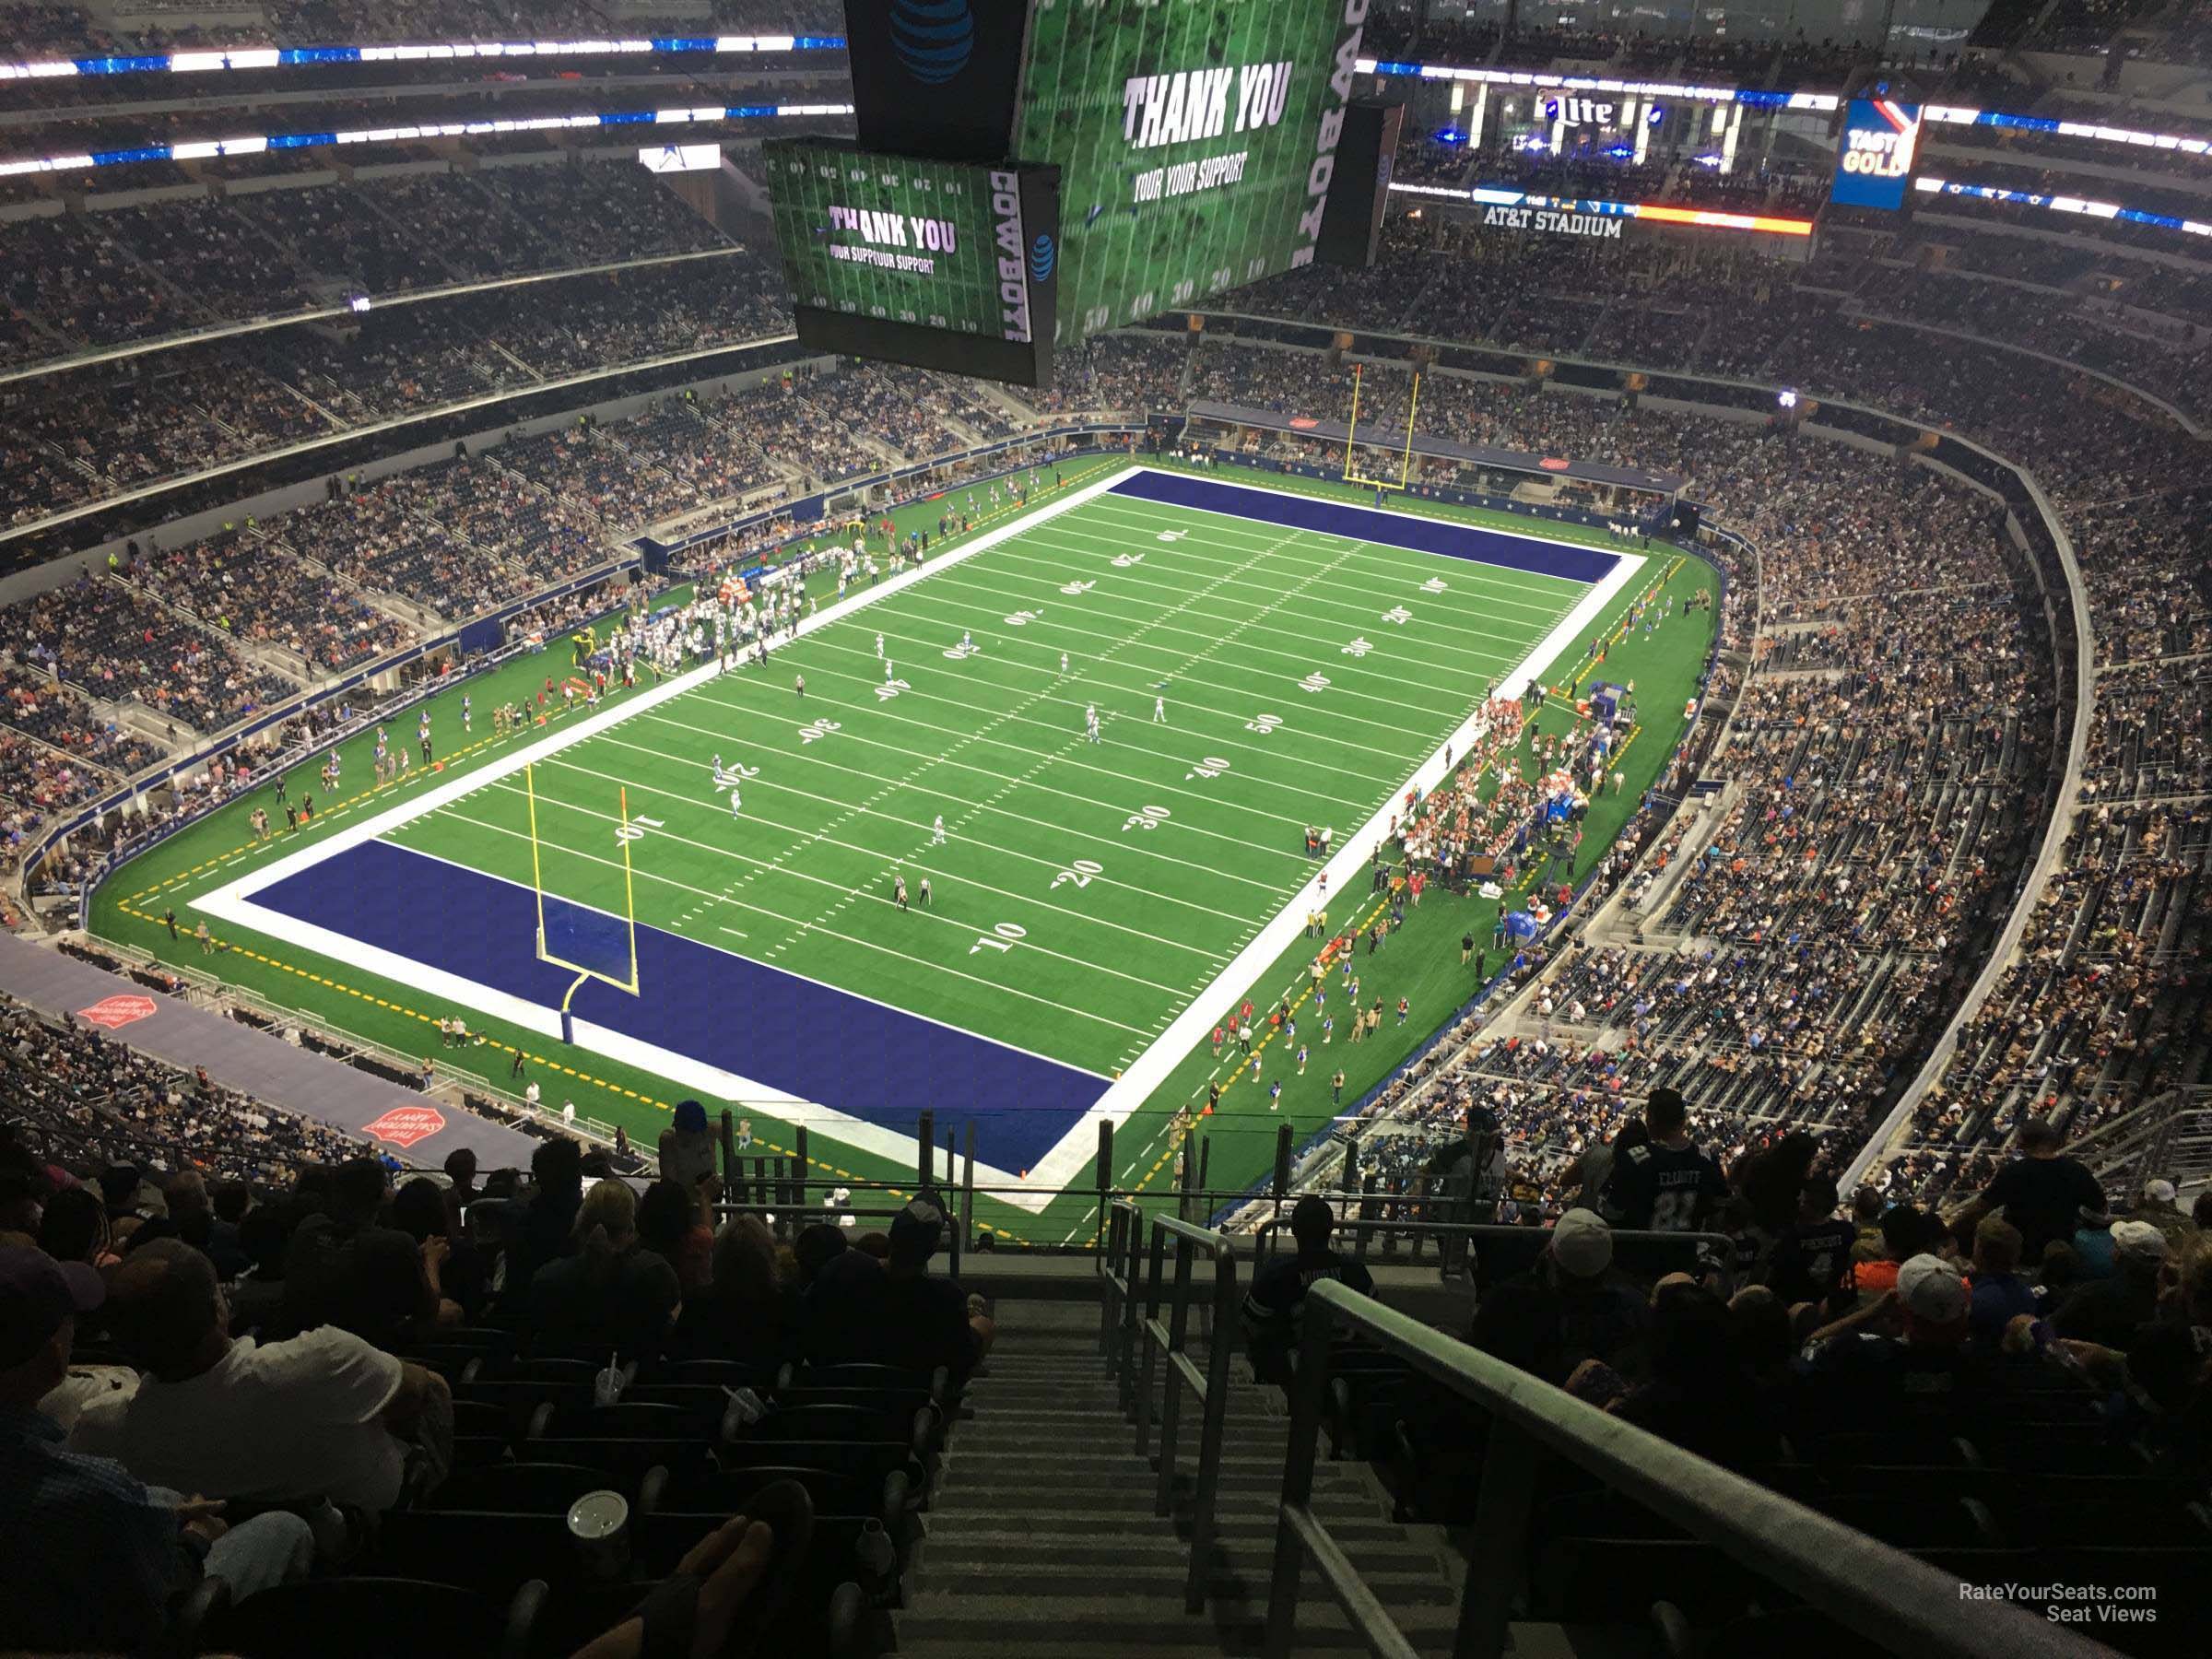 section 451, row 22 seat view  for football - at&t stadium (cowboys stadium)